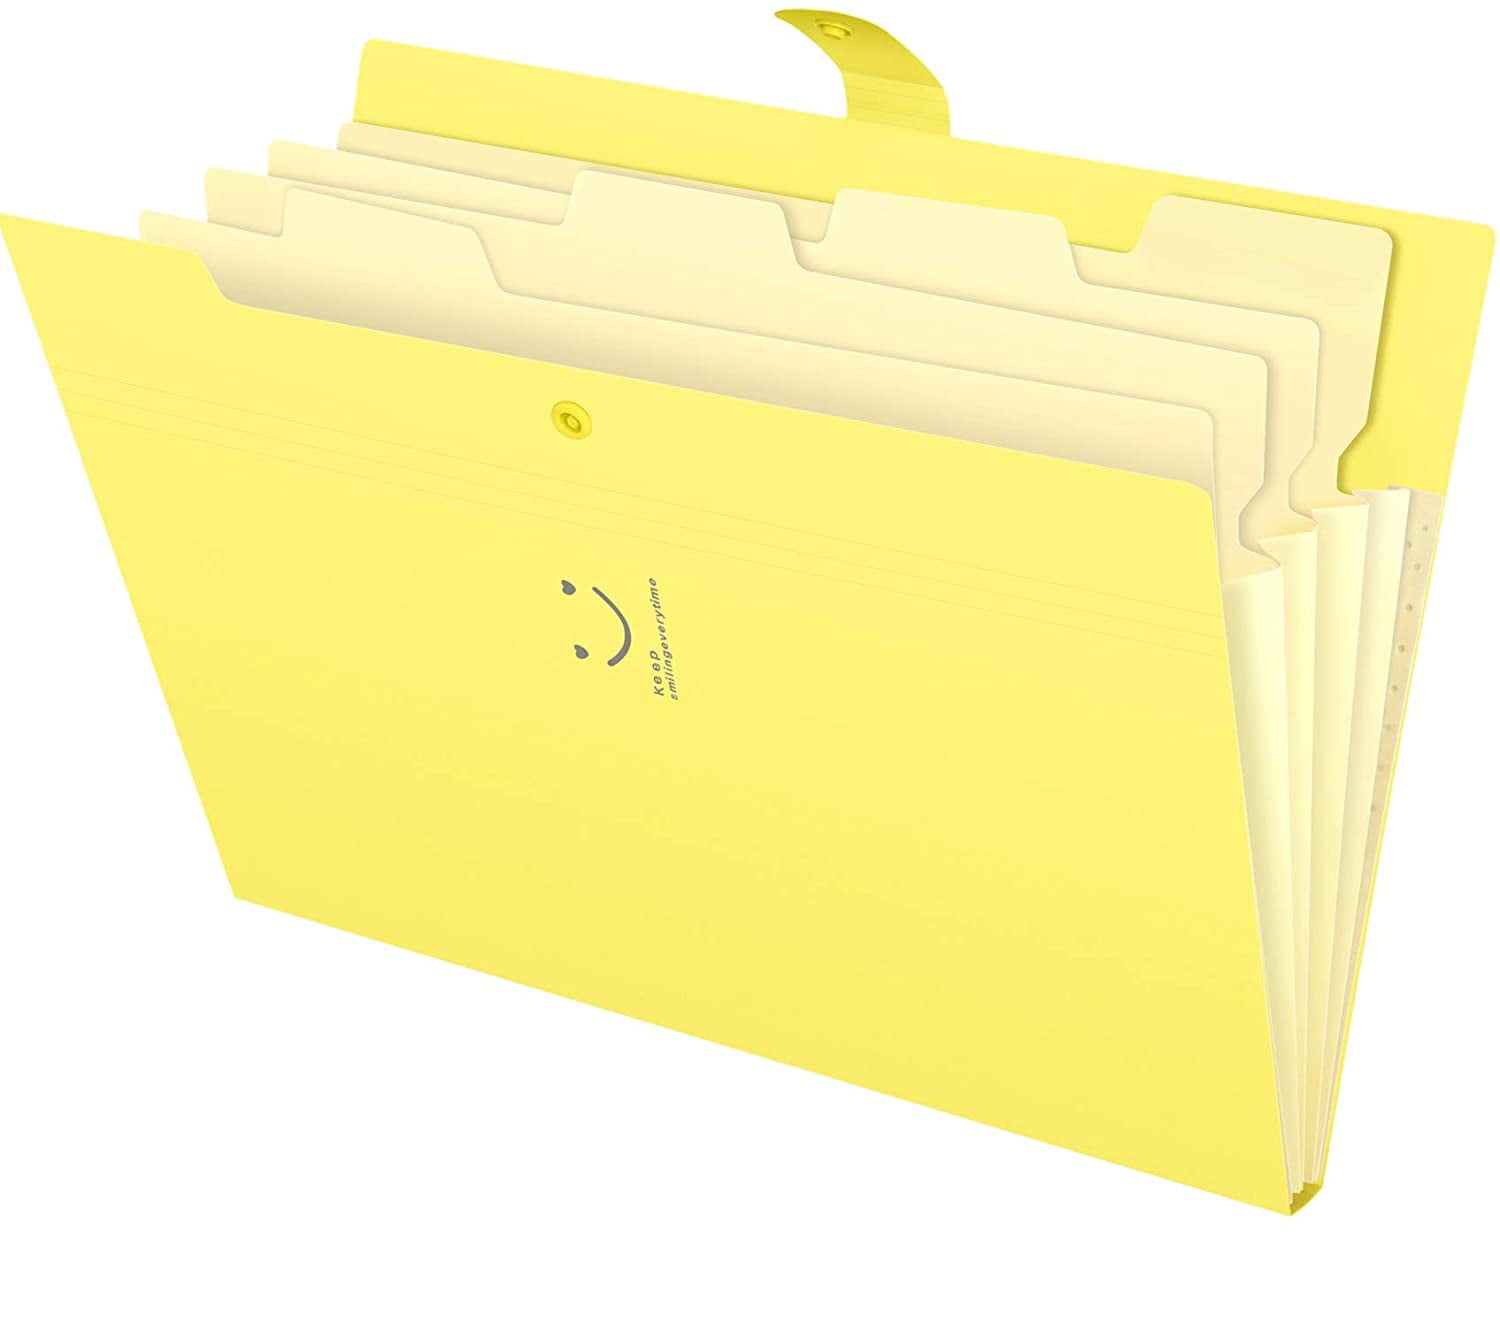 3 Pack Plastic A4 Letter Size Document Organizer with File Folder Labels for School Office Home 01-a Expanding File Folders 